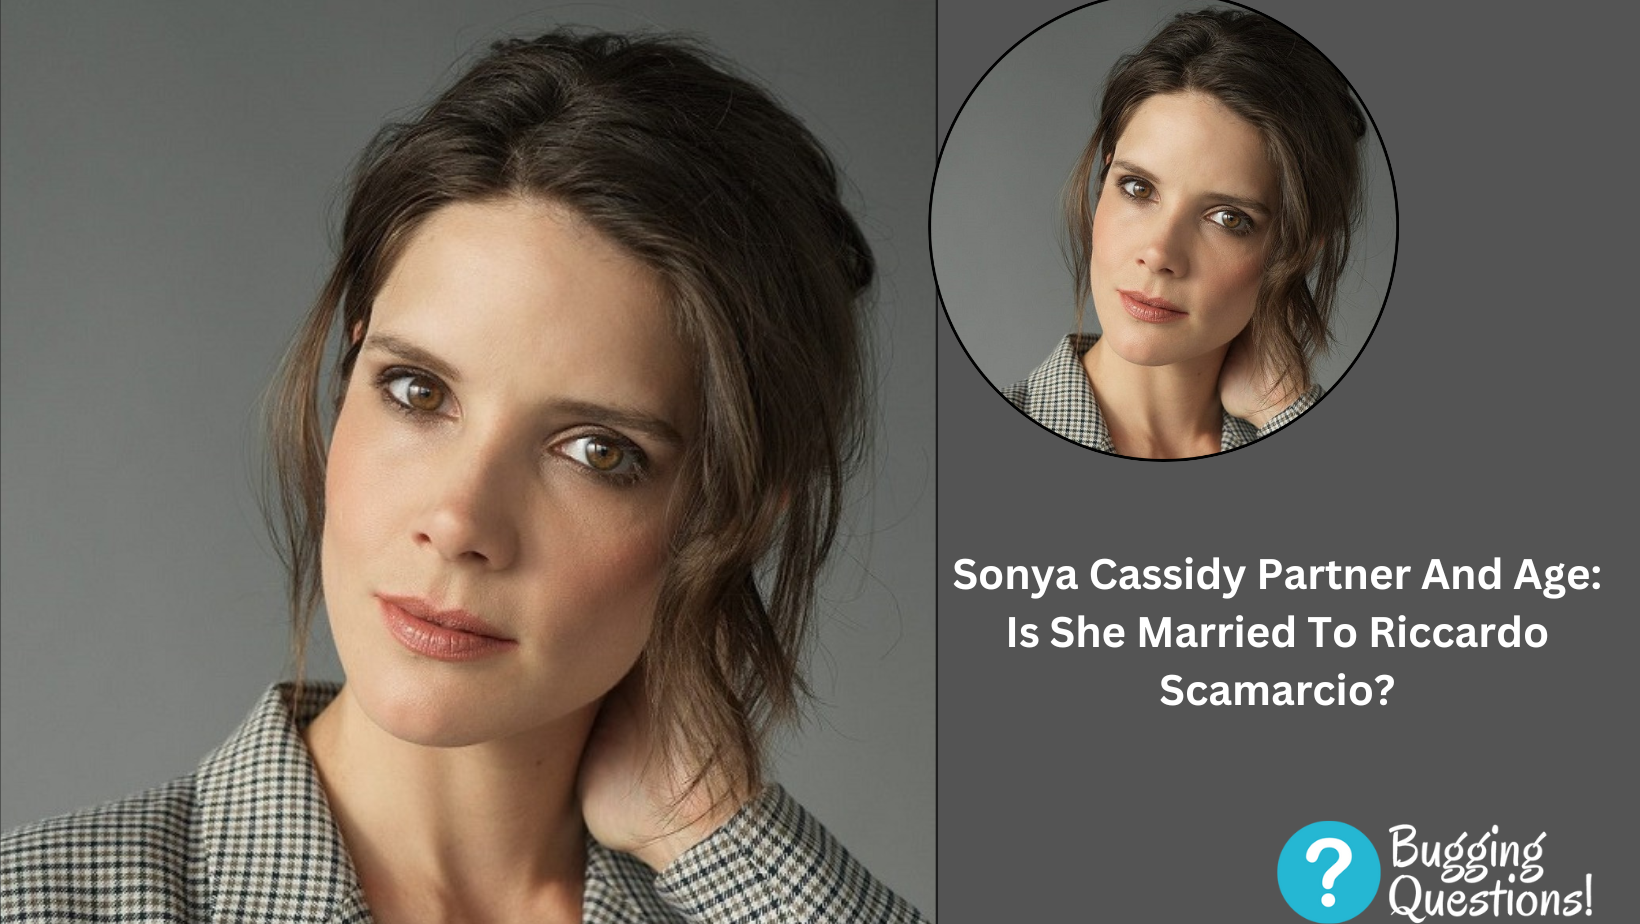 Sonya Cassidy Partner And Age